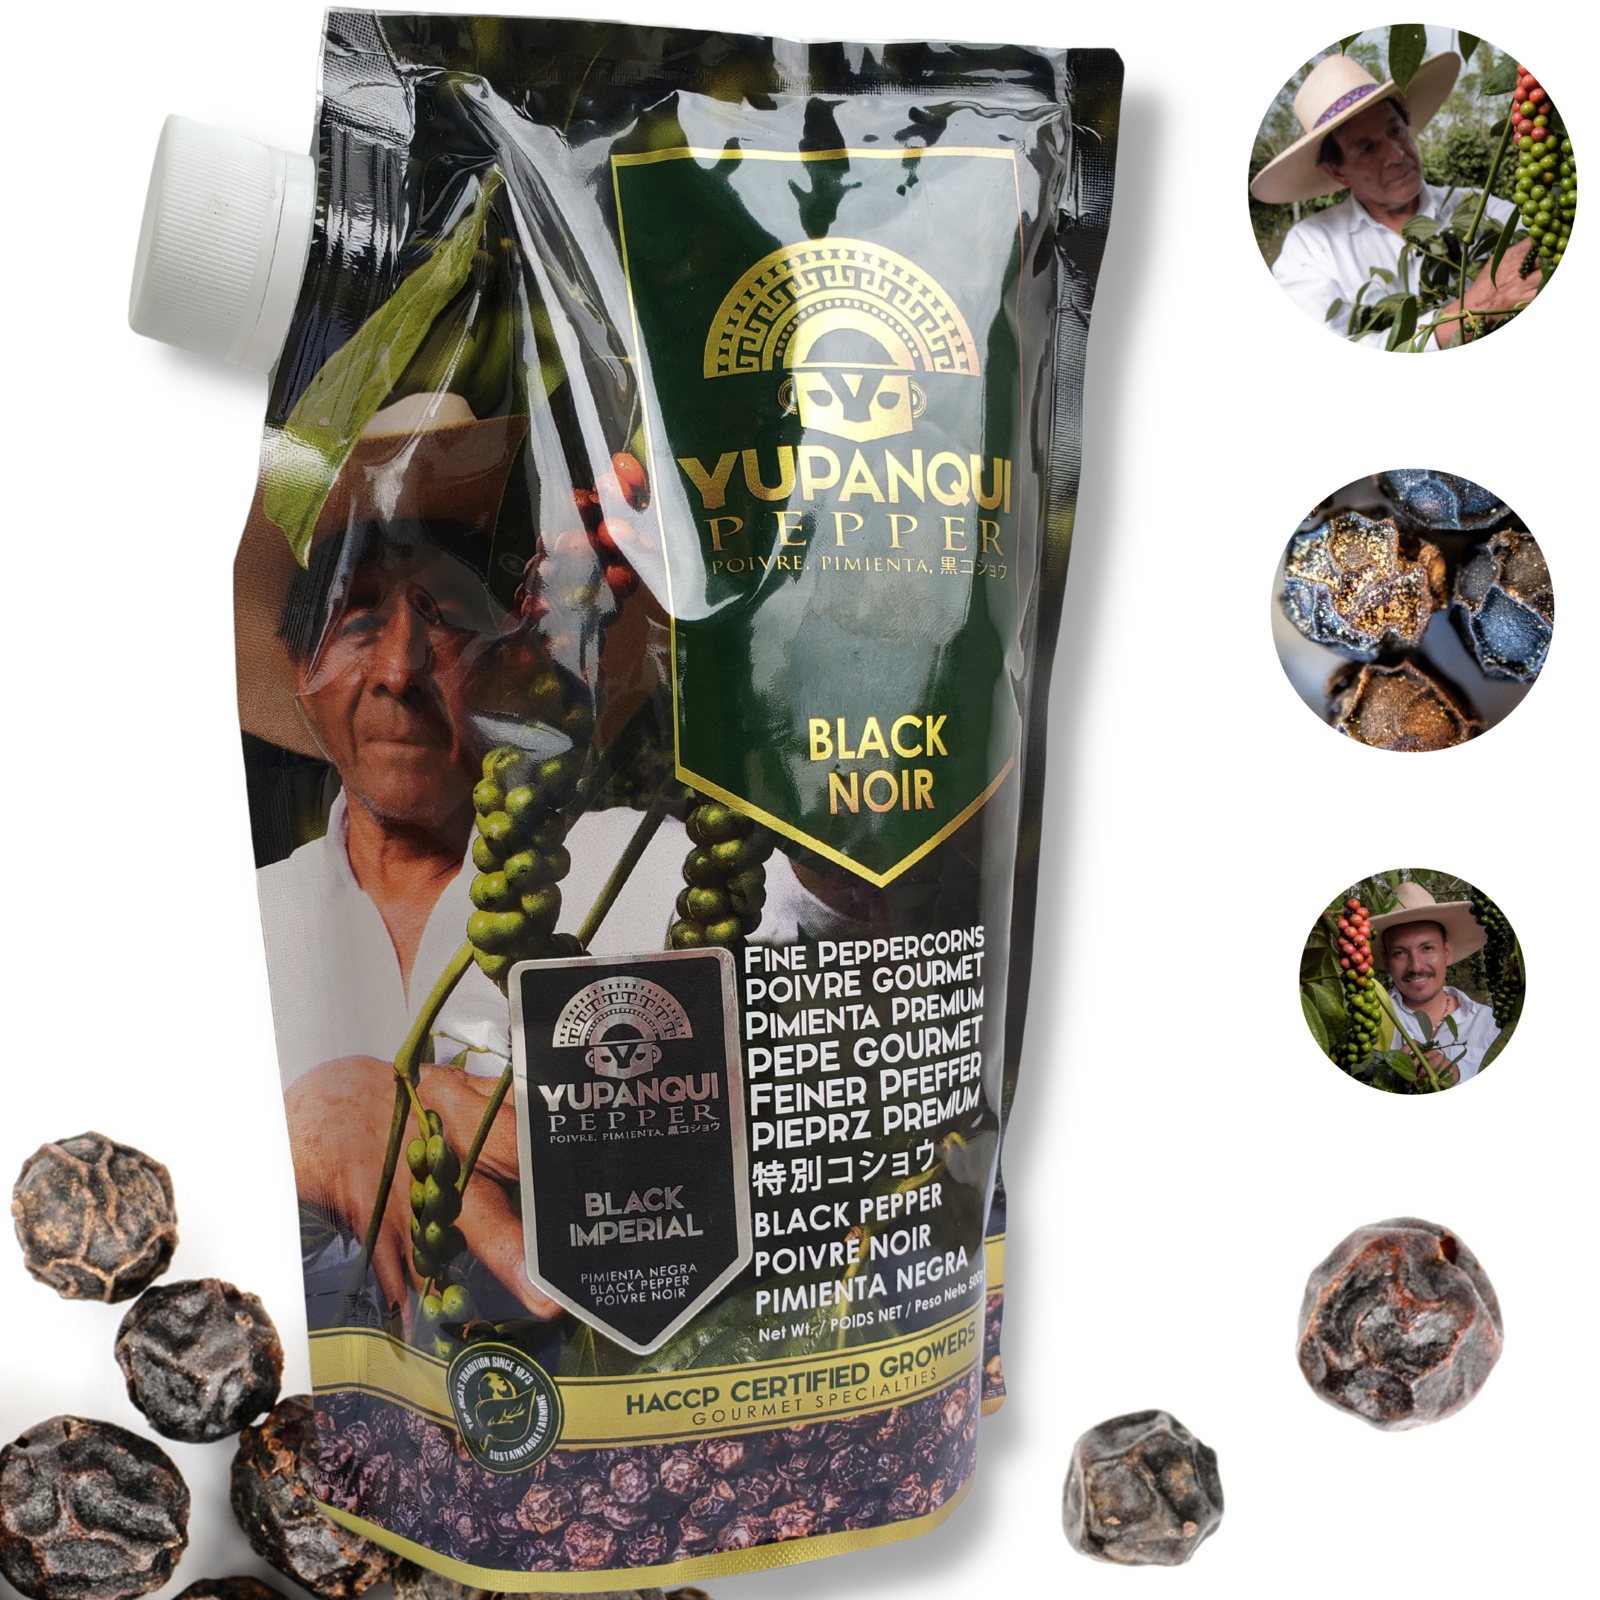 Black Imperial, Best Black Pepper for Cooking by Yupanqui family 17.6oz - $39.00